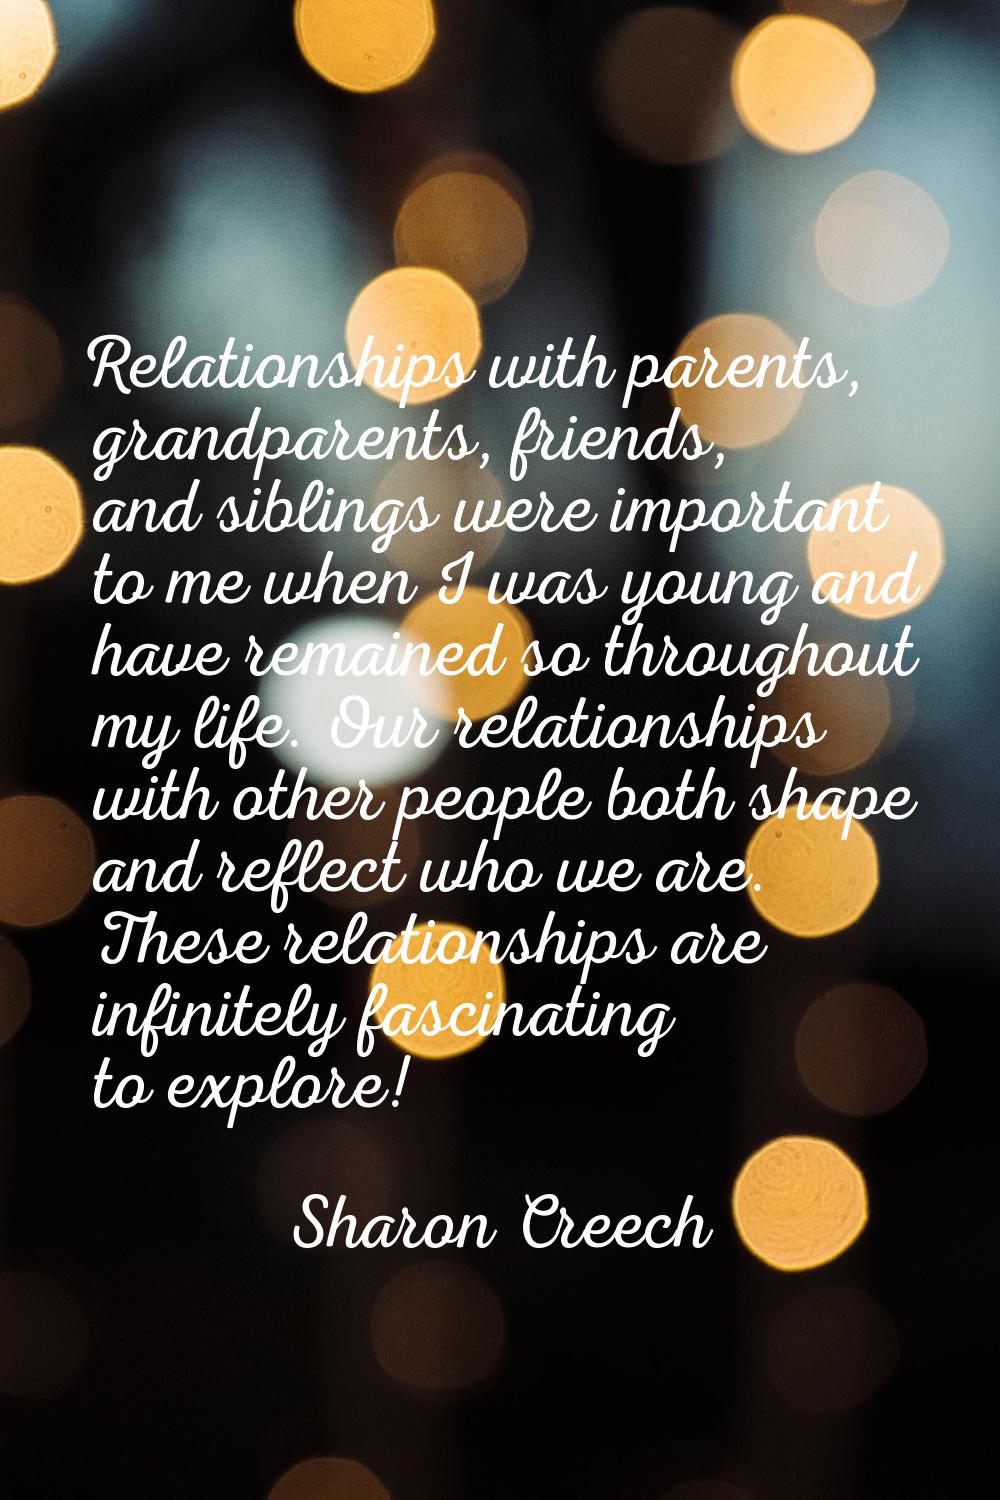 Relationships with parents, grandparents, friends, and siblings were important to me when I was you